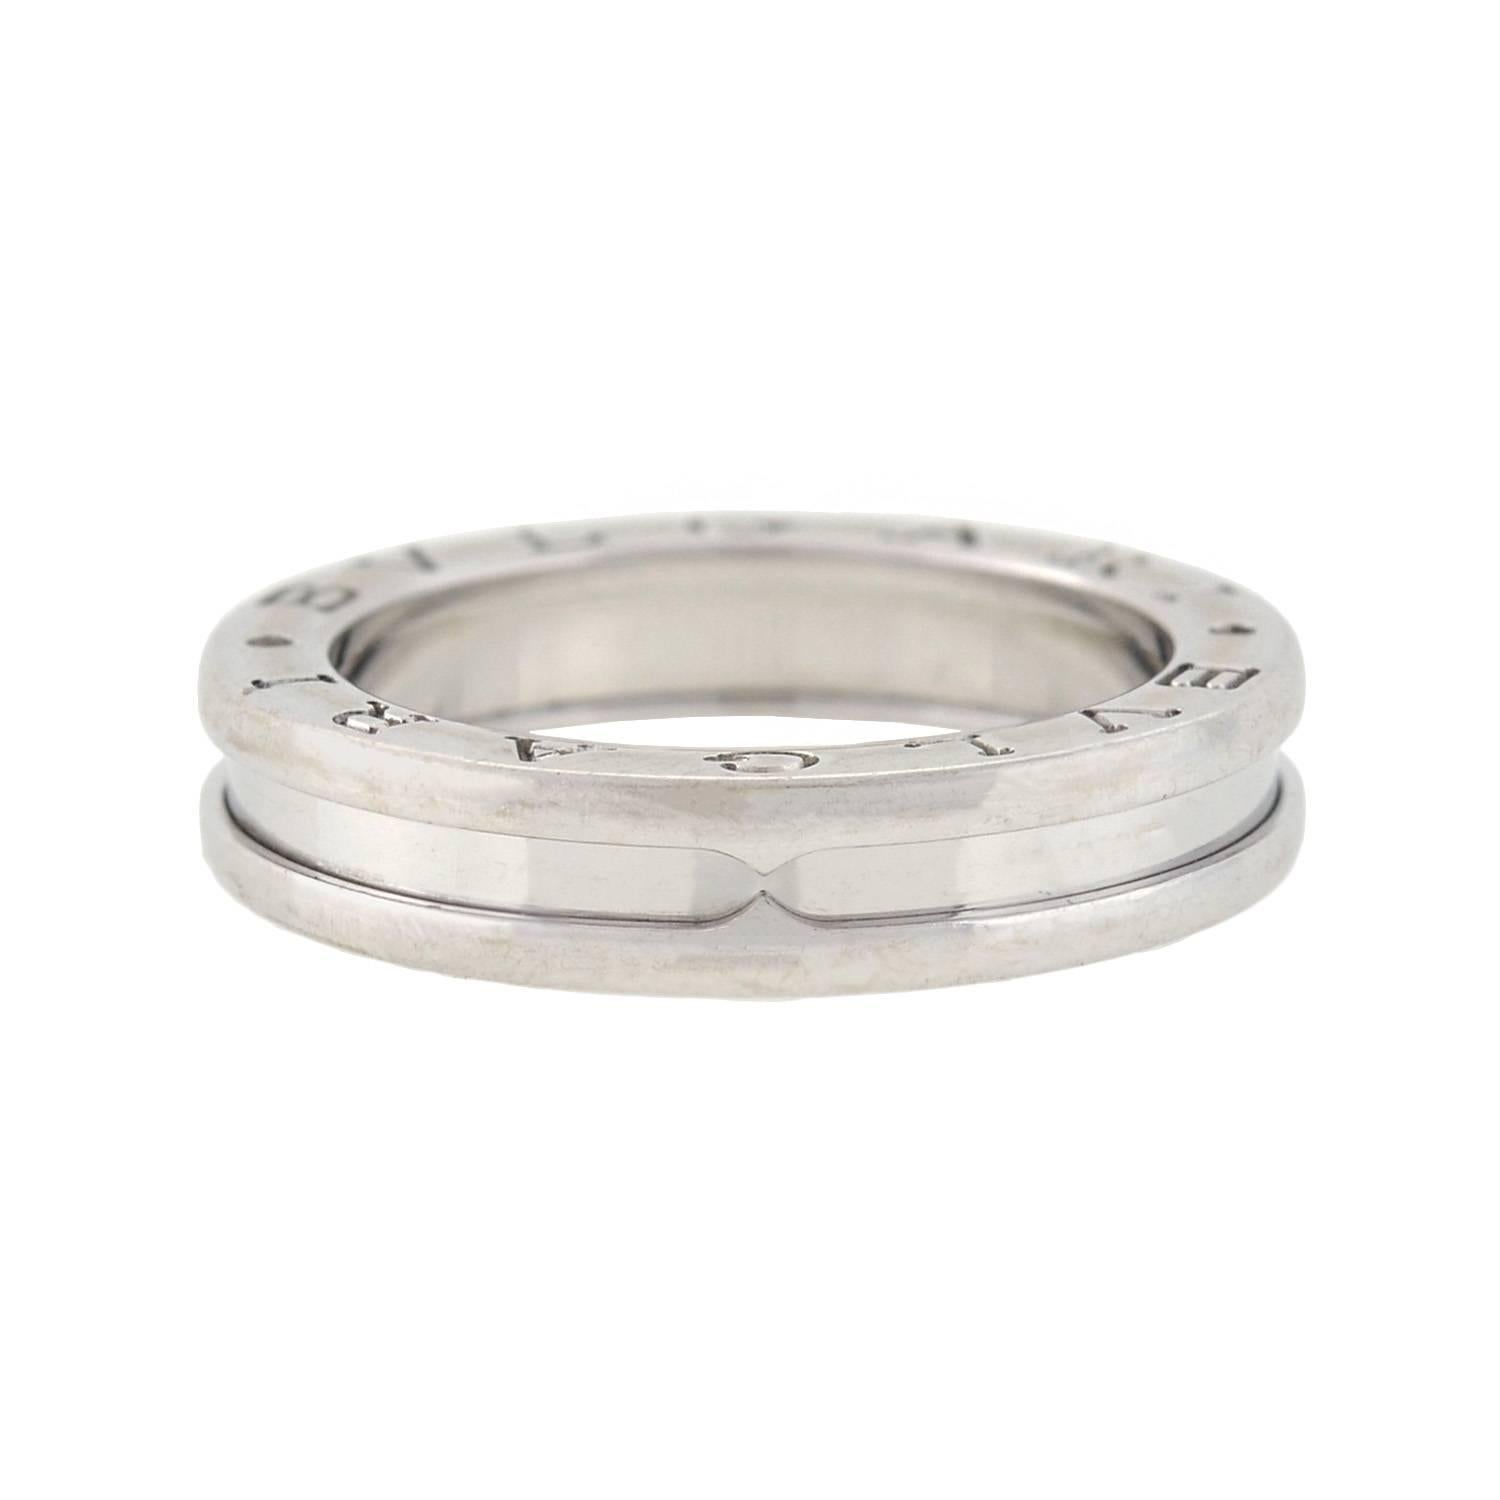 Known as the "B.ZERO 1" single band, this fabulous gold ring is a signed piece by legendary maker Bvlgari! Made of 18kt white gold, the ring has a layered design with a smooth band center that is capped on either side. The outer 'layered